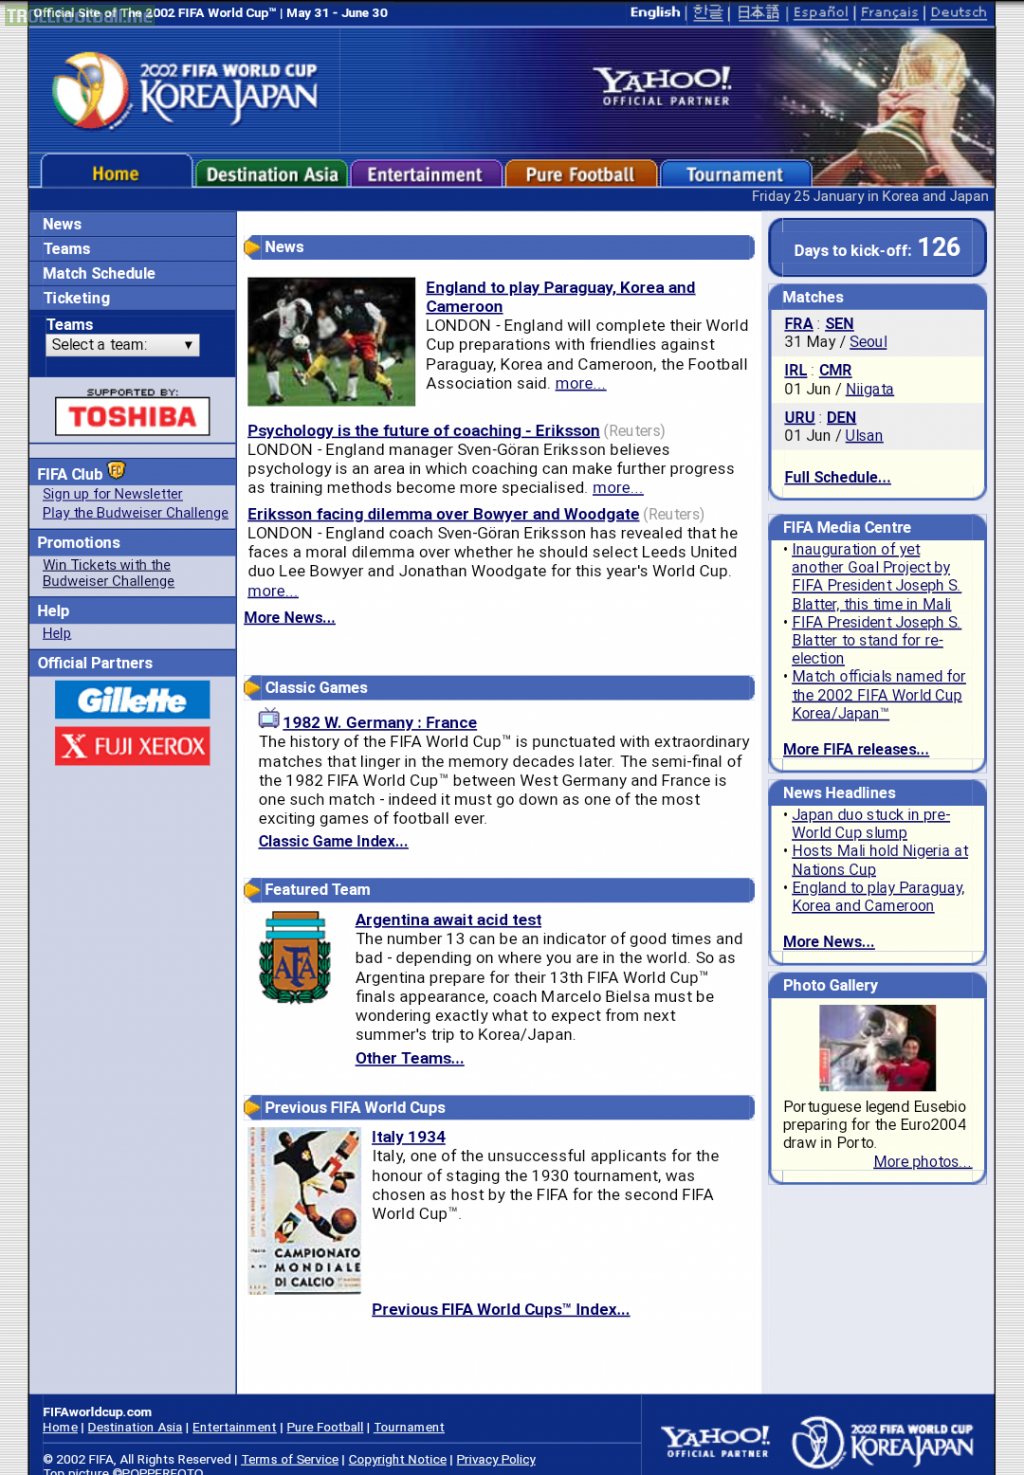 Anyone else remember the old 2002 FIFA World Cup website?